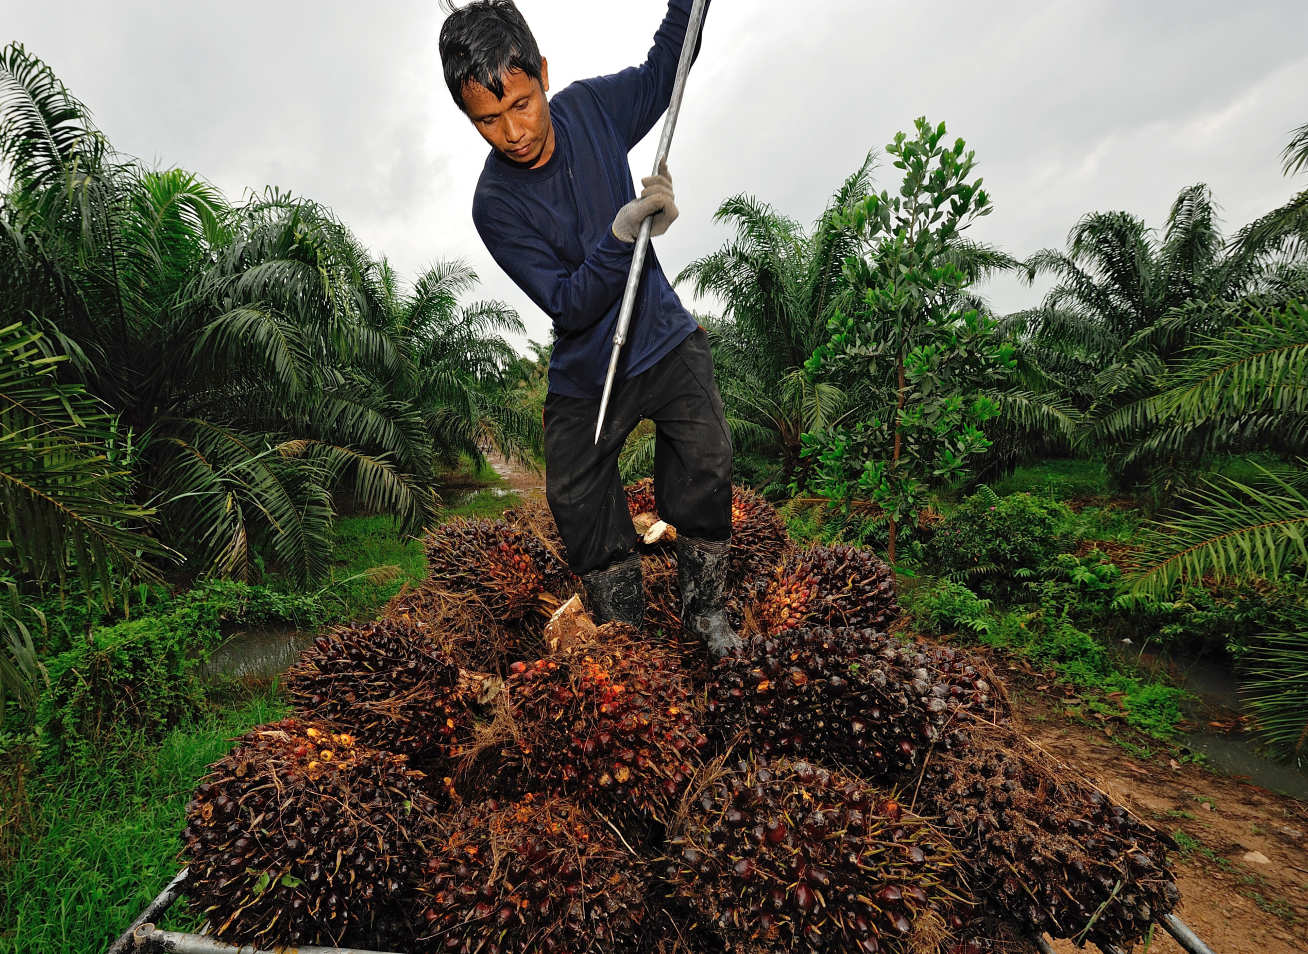 A man working with palm oil fruit in Thailand